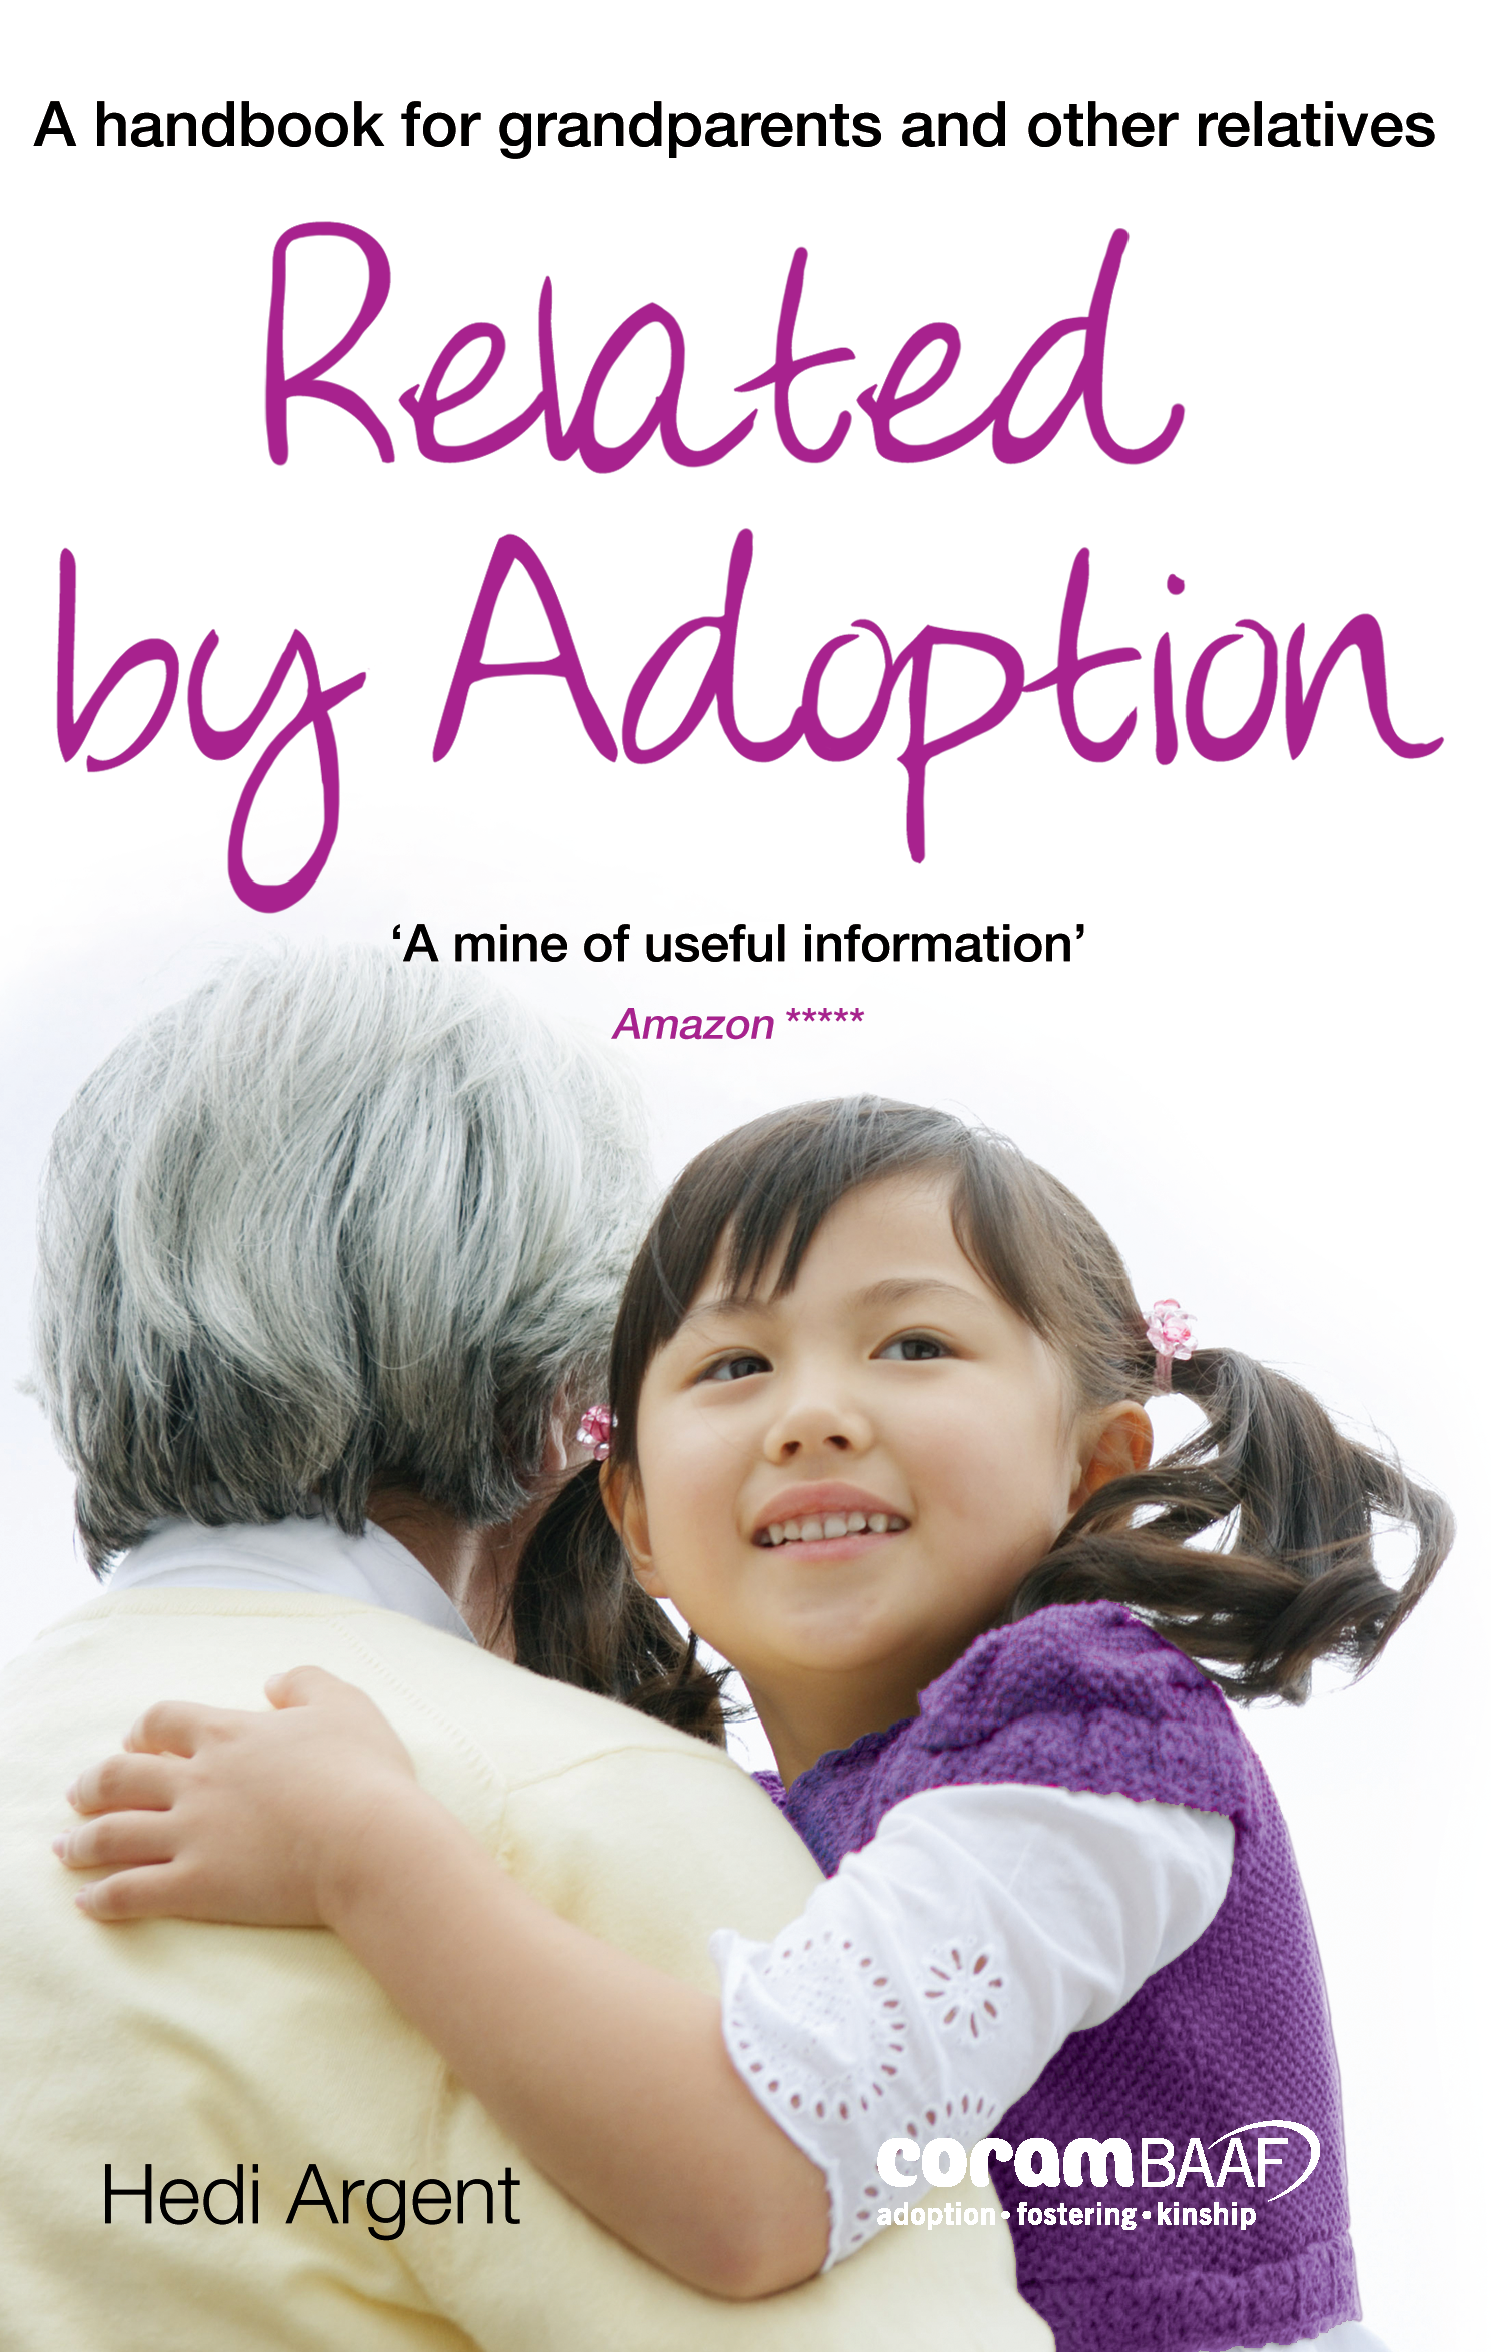 Related by adoption